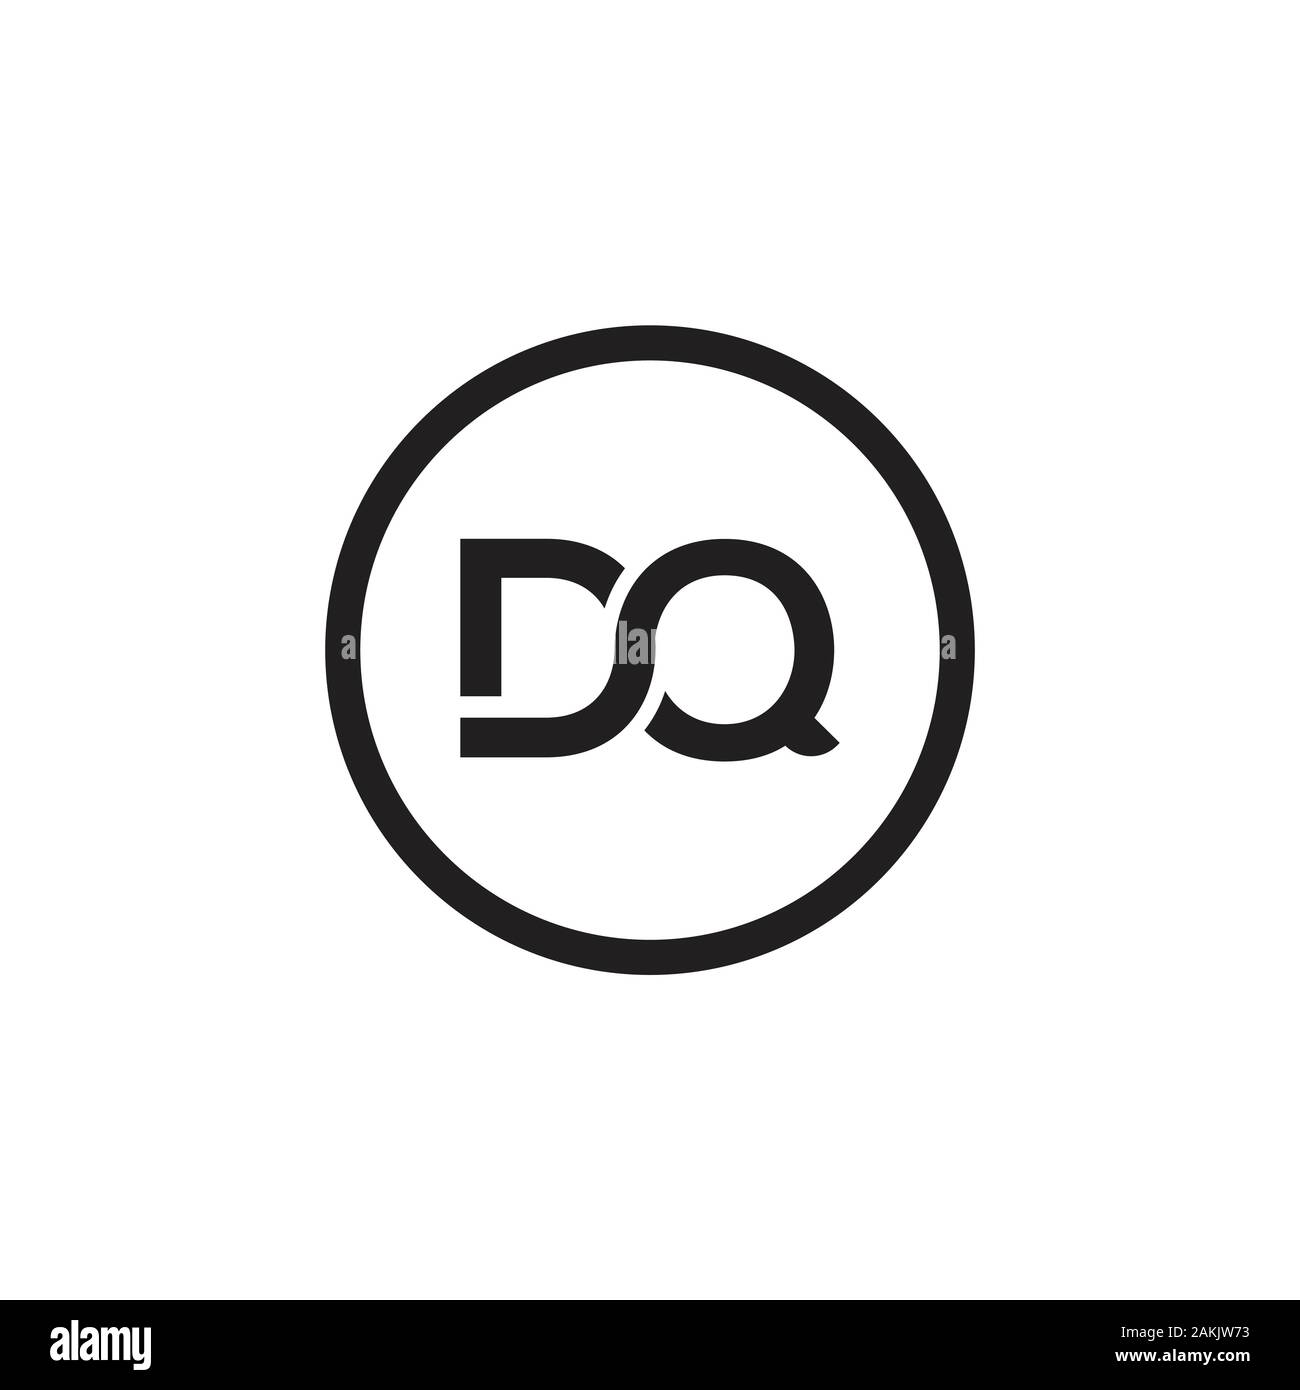 Dq logo Black and White Stock Photos & Images - Alamy